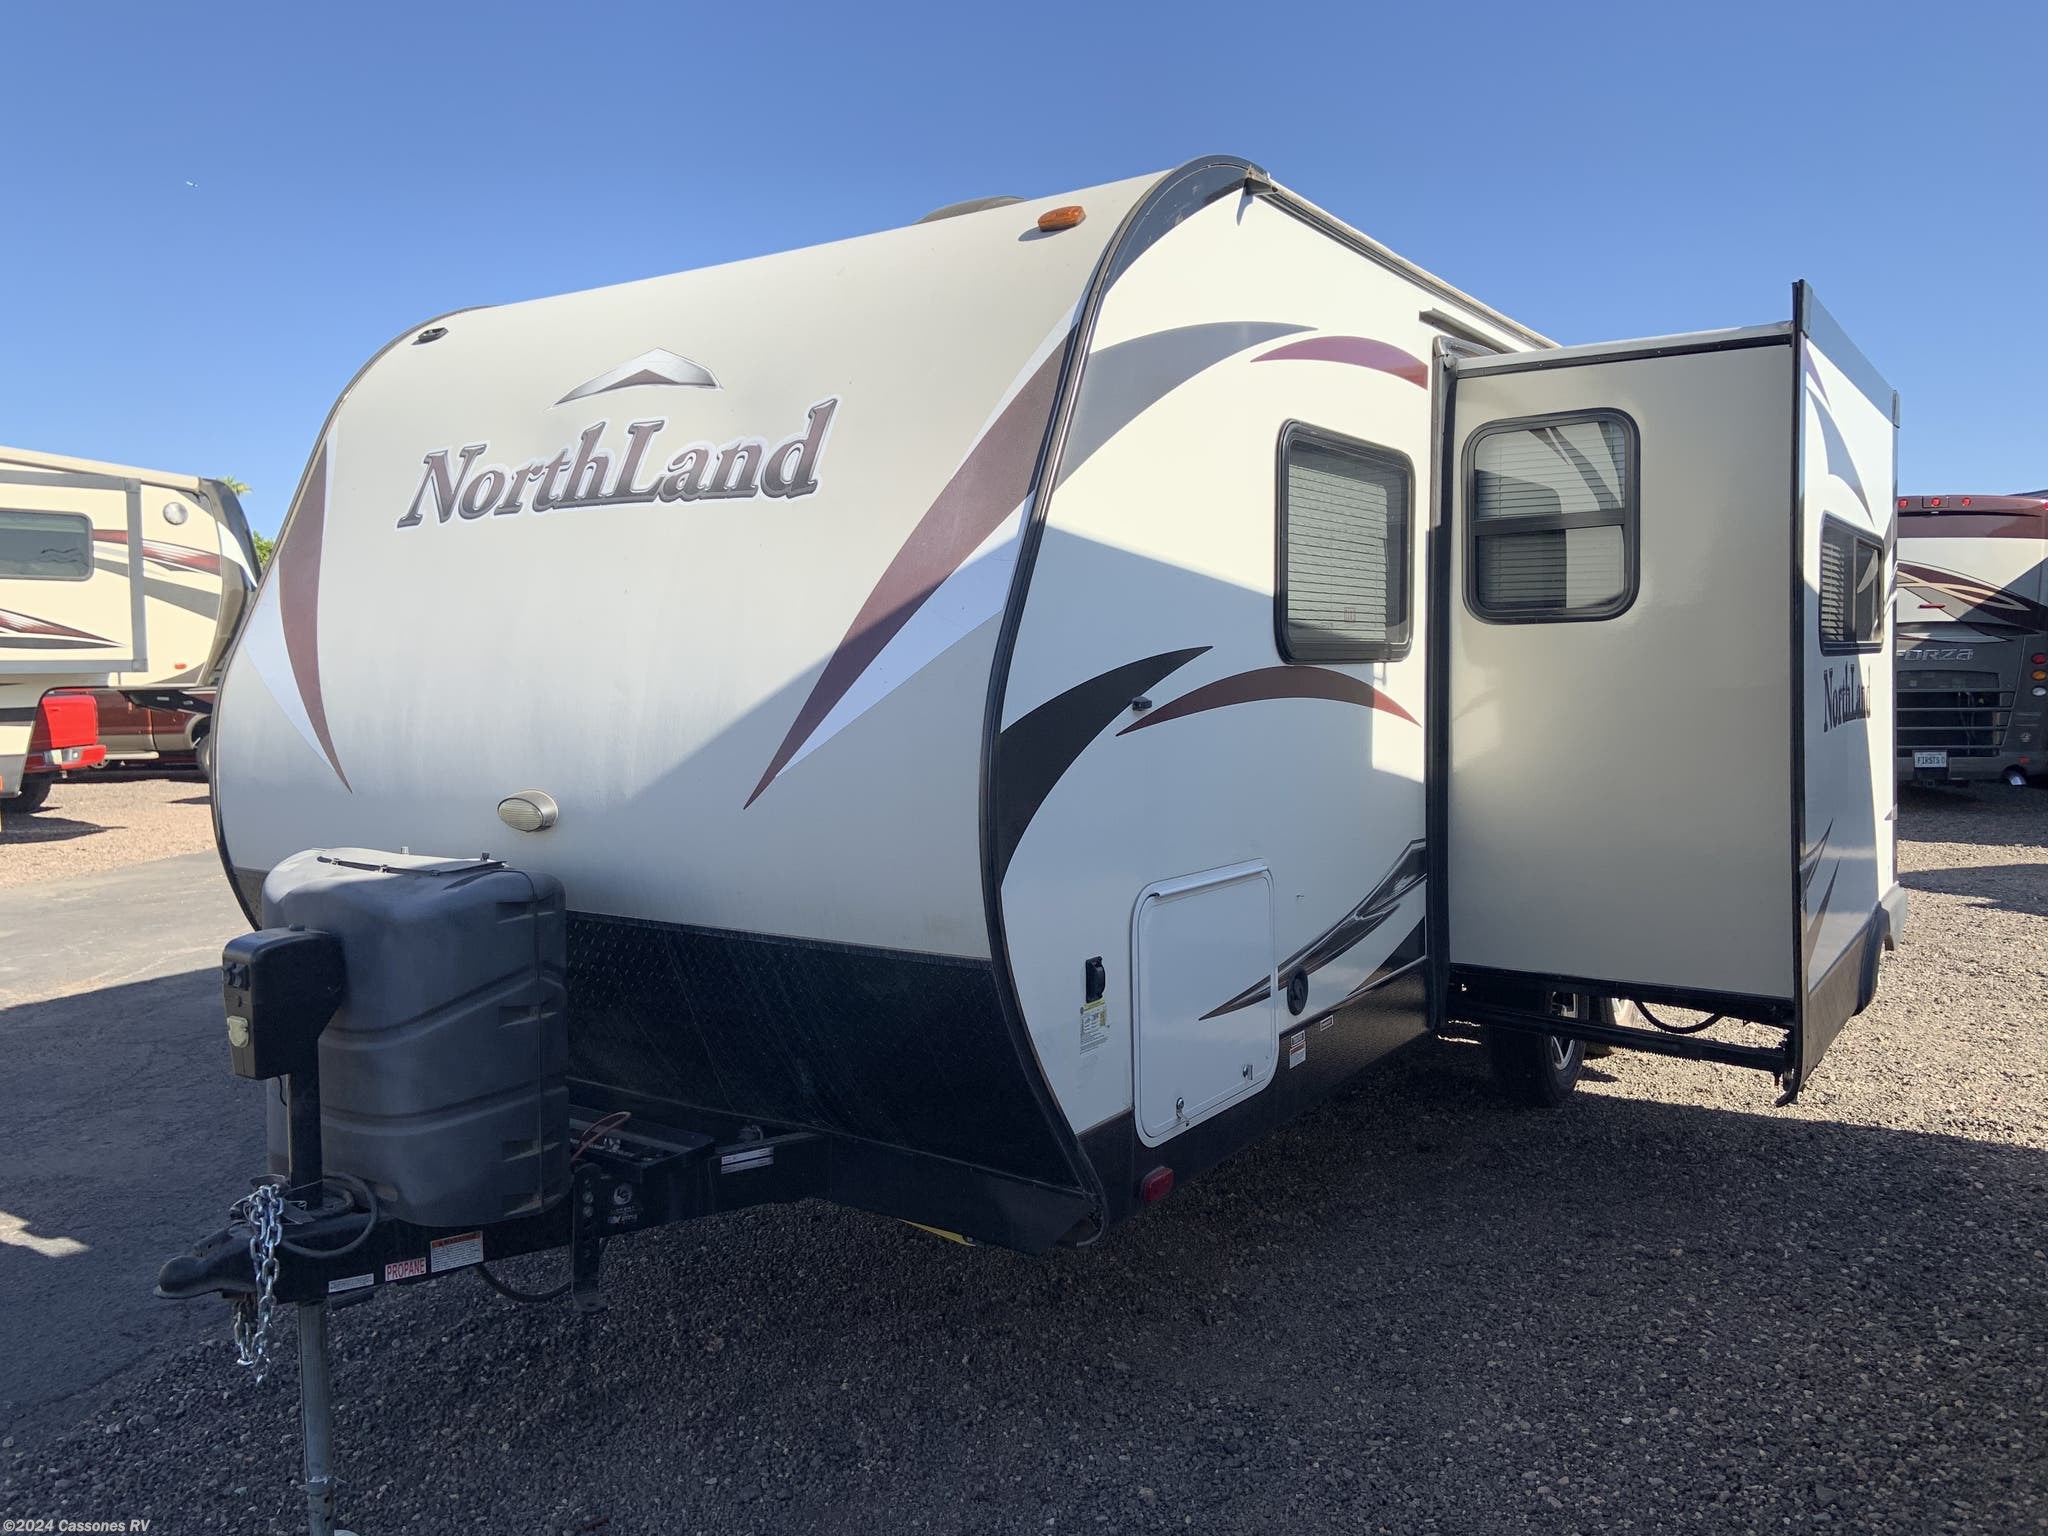 northland travel trailer reviews